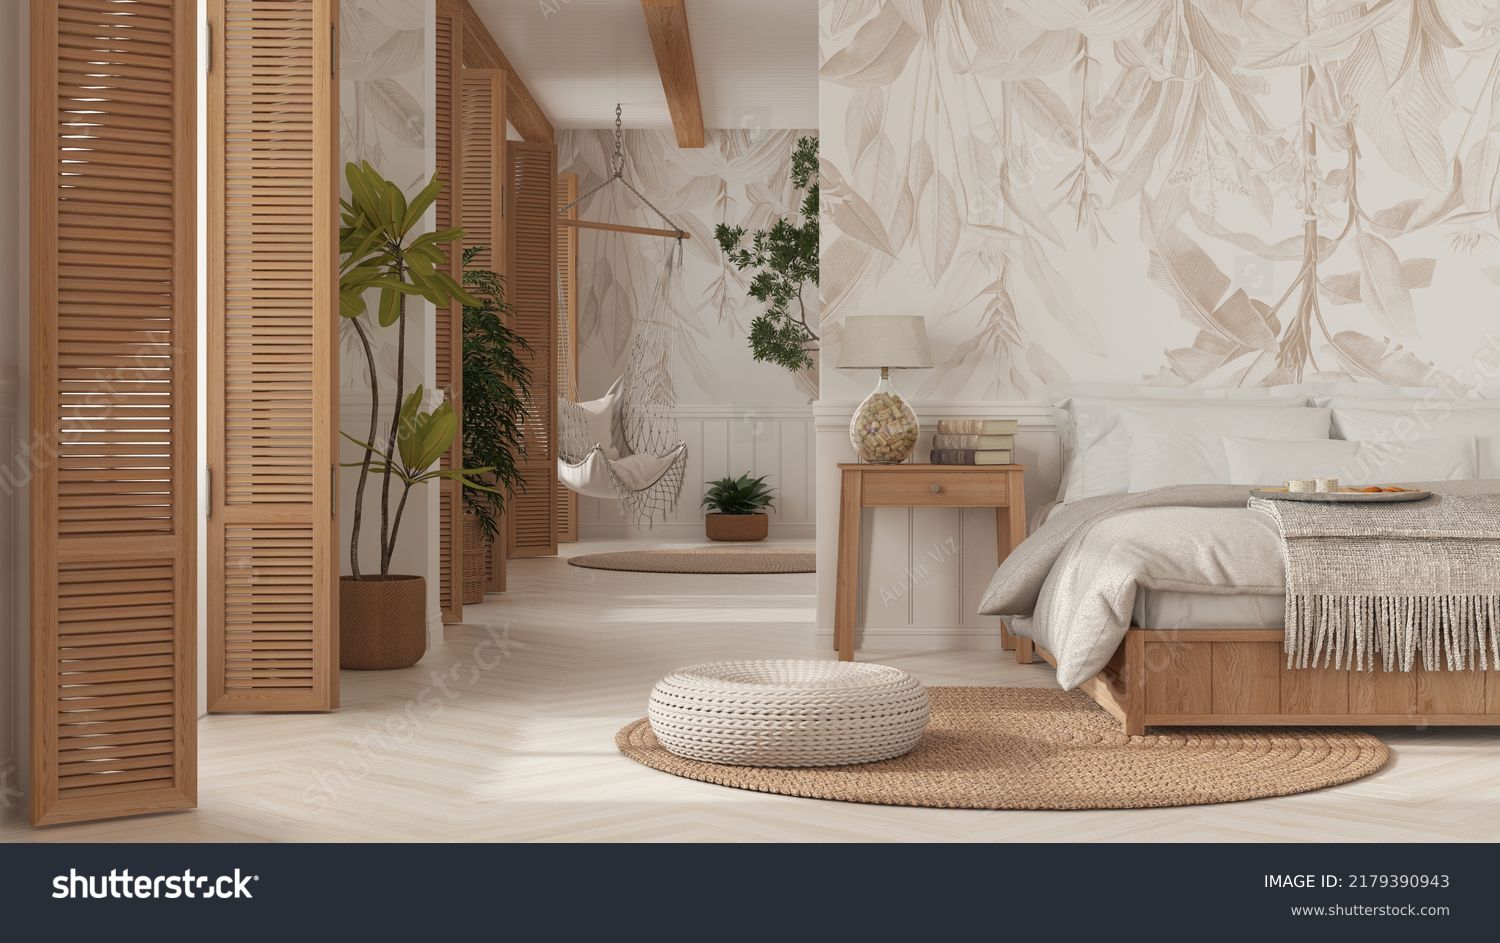 Country wooden bedroom close up in boho style in white and beige tones. Bed, hanging chair and potted plants. Window with shutters and wallpaper. Bohemian vintage interior design, 3d illustration Illustrazione stock